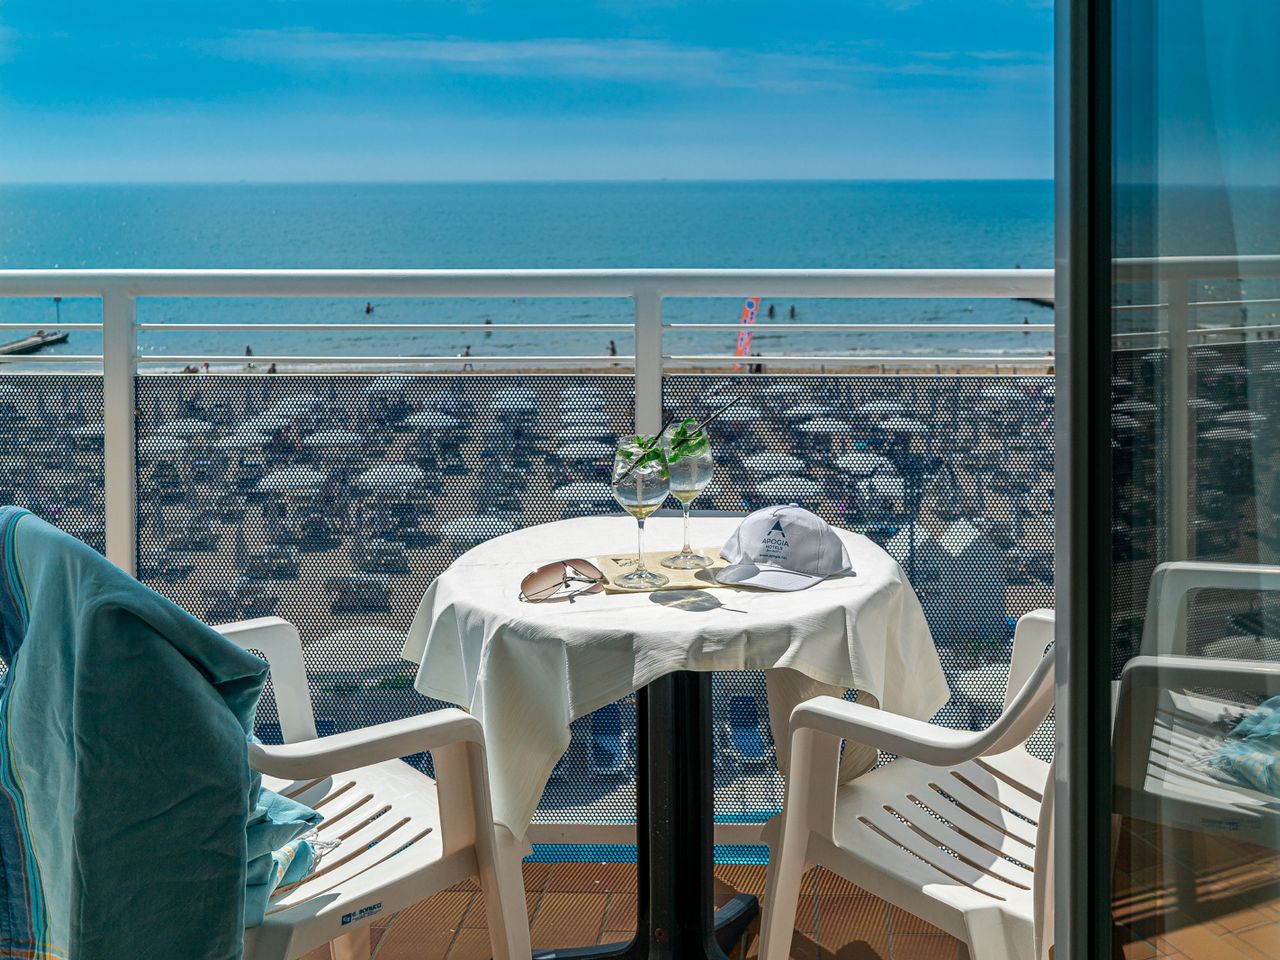 Entspannung am Meer - 3 Tage in Lido di Jesolo